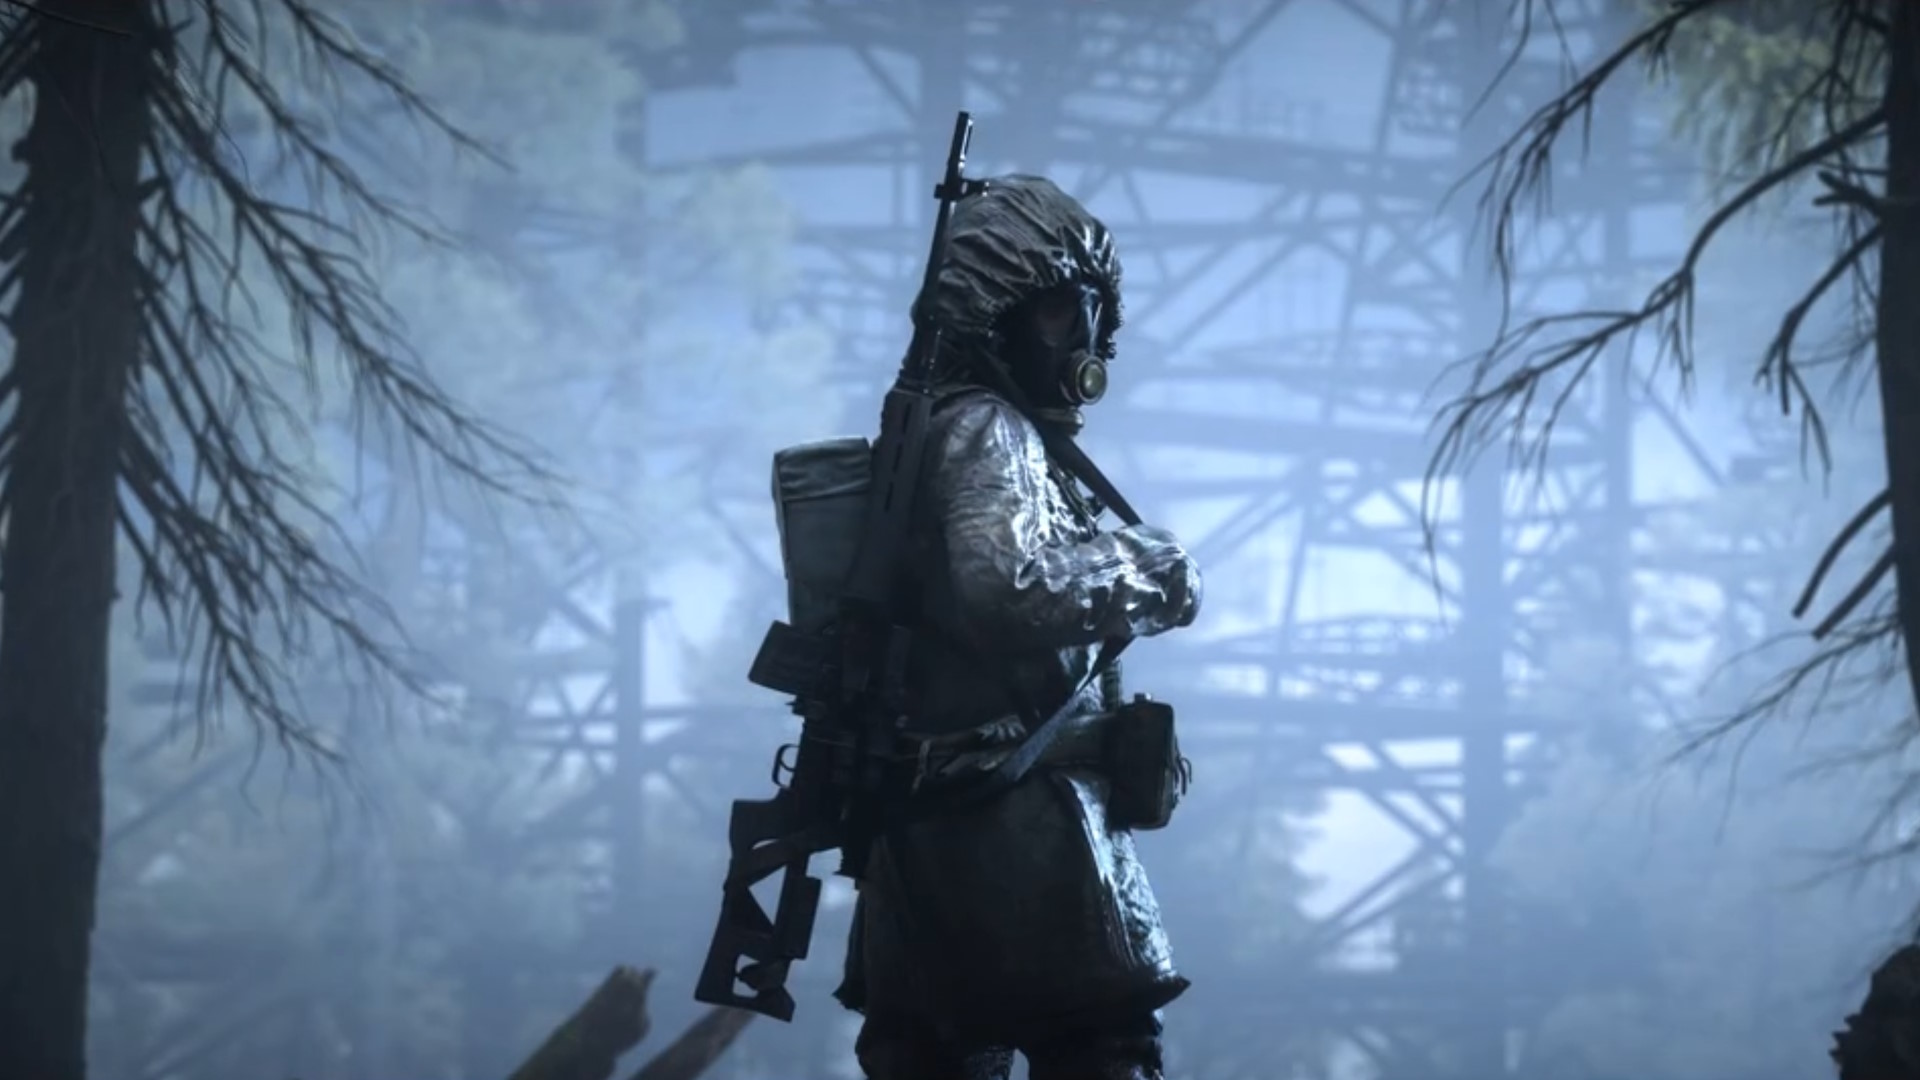 S.T.A.L.K.E.R. 2: Heart of Chornobyl Receives New Teaser About NON